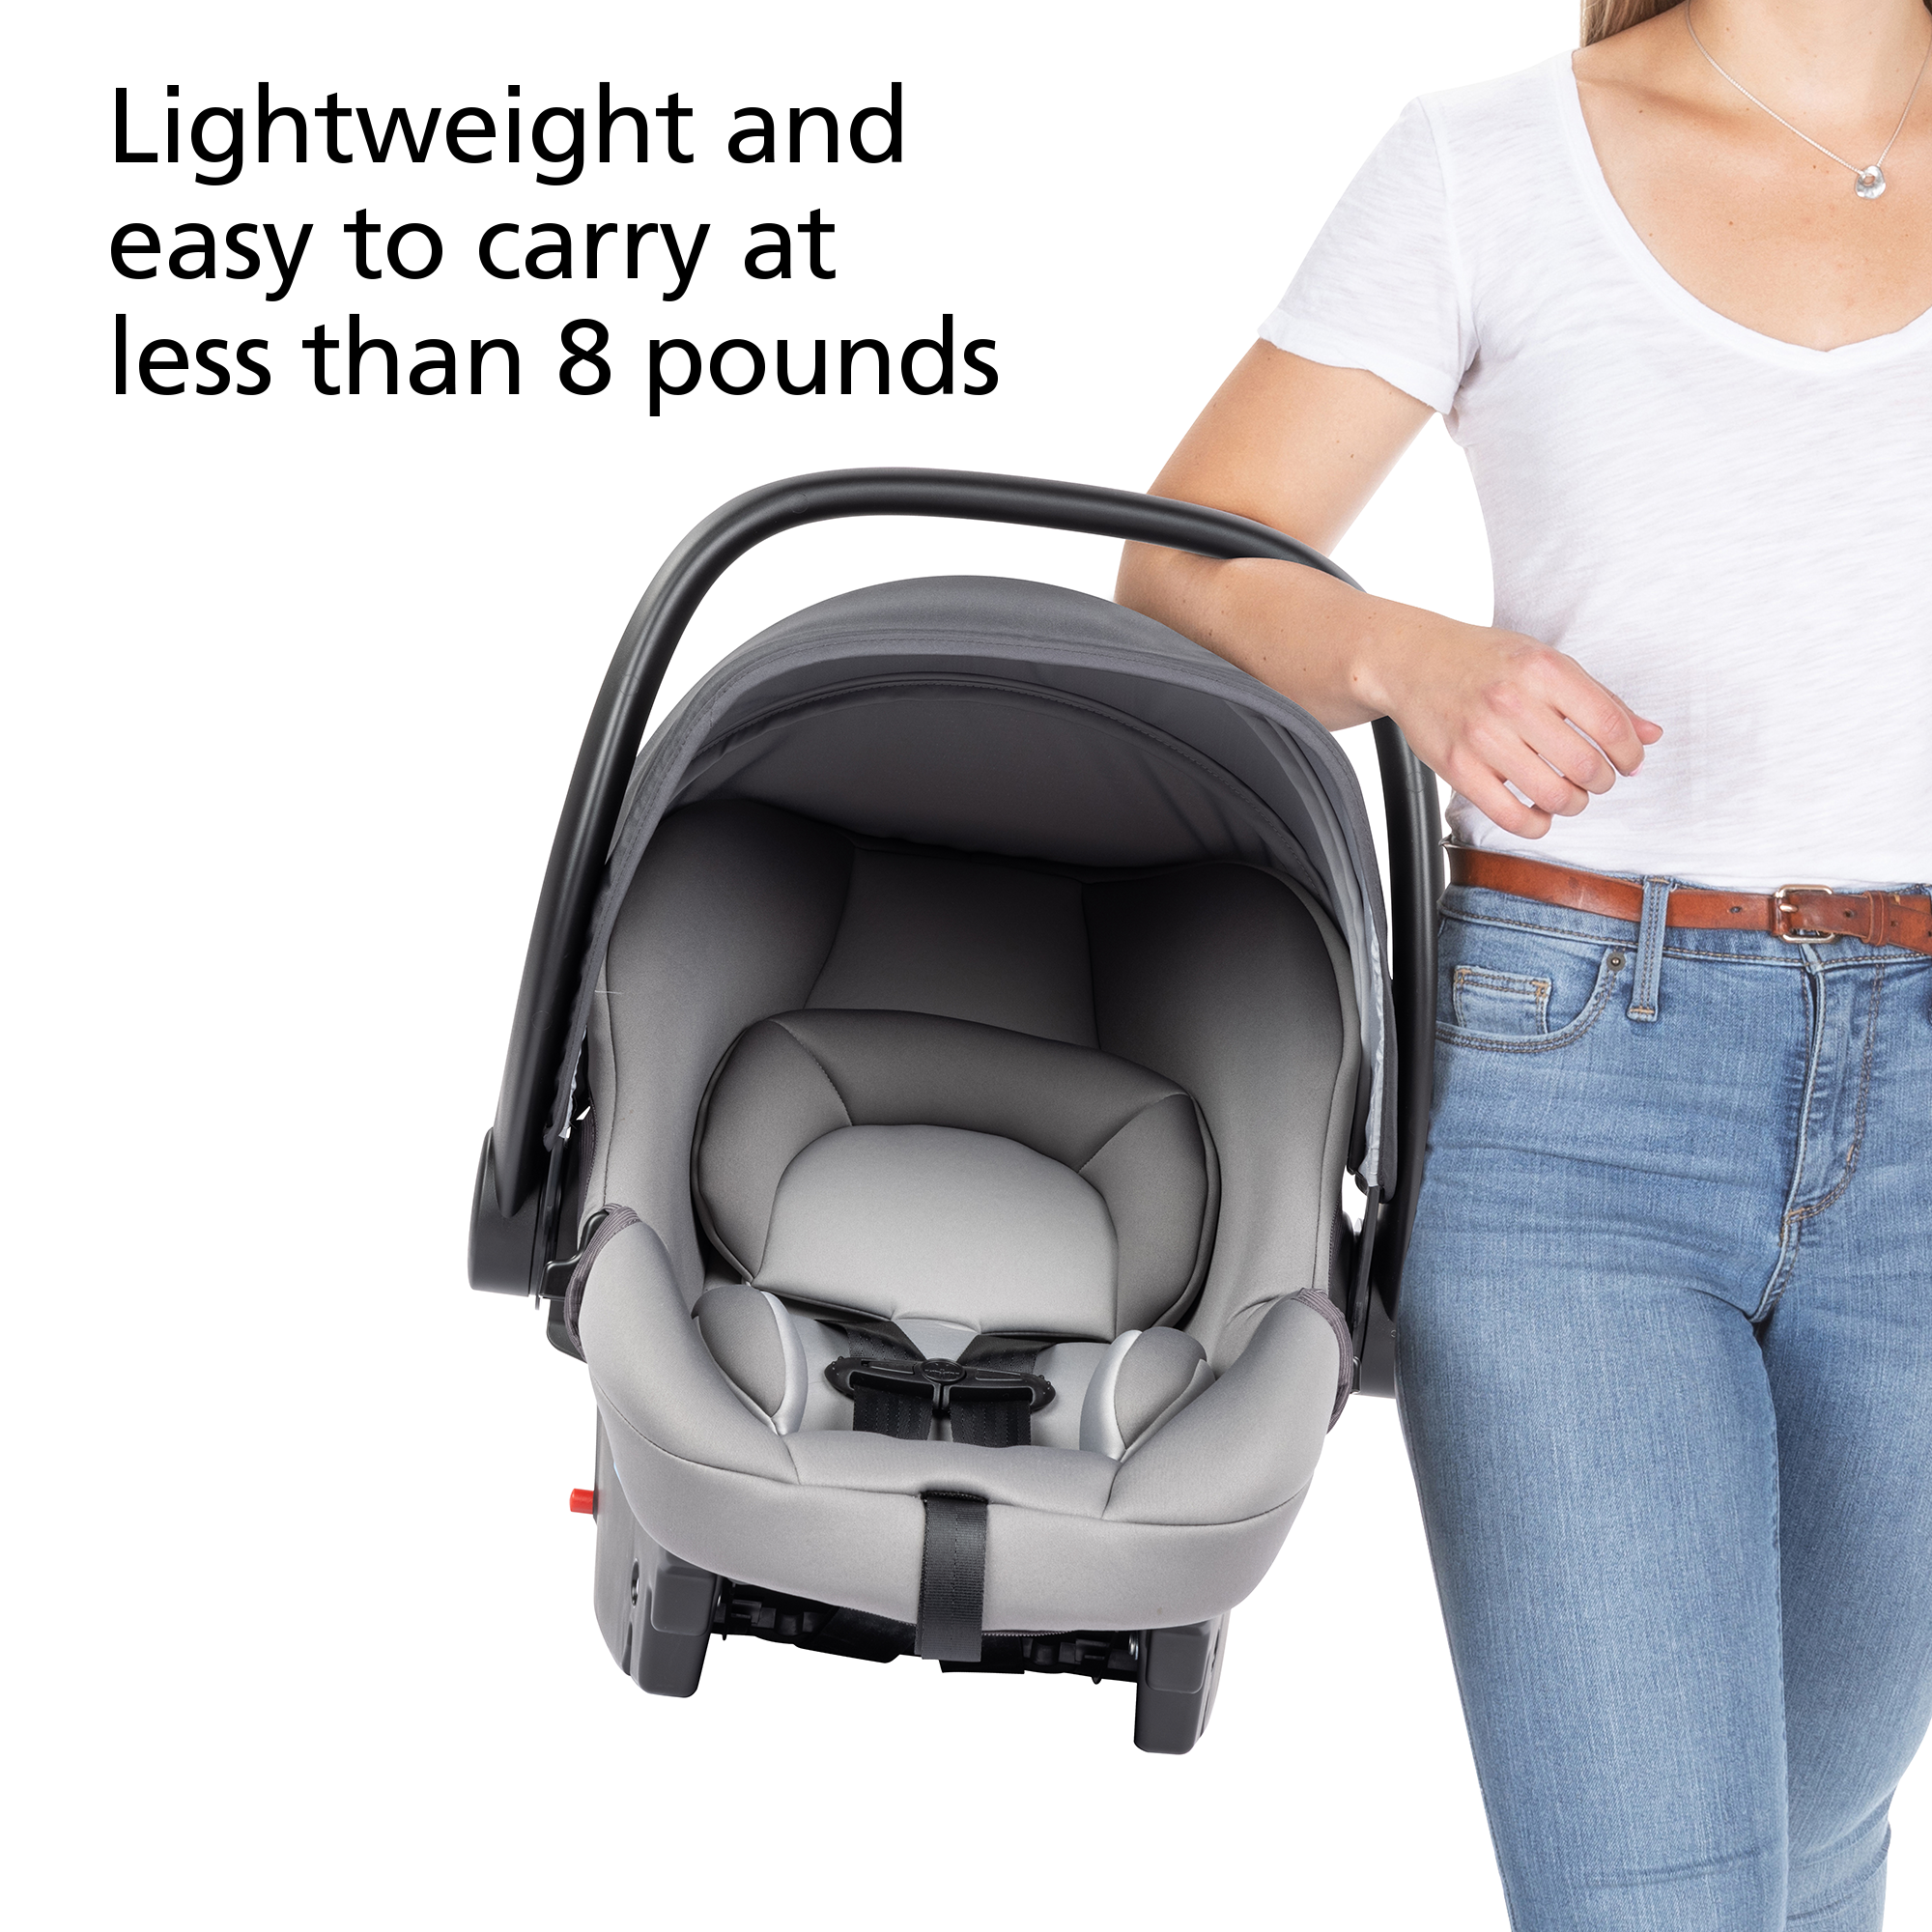 onBoard™35 SecureTech™ Infant Car Seat - lightweight and easy to carry at less than 8 pounds